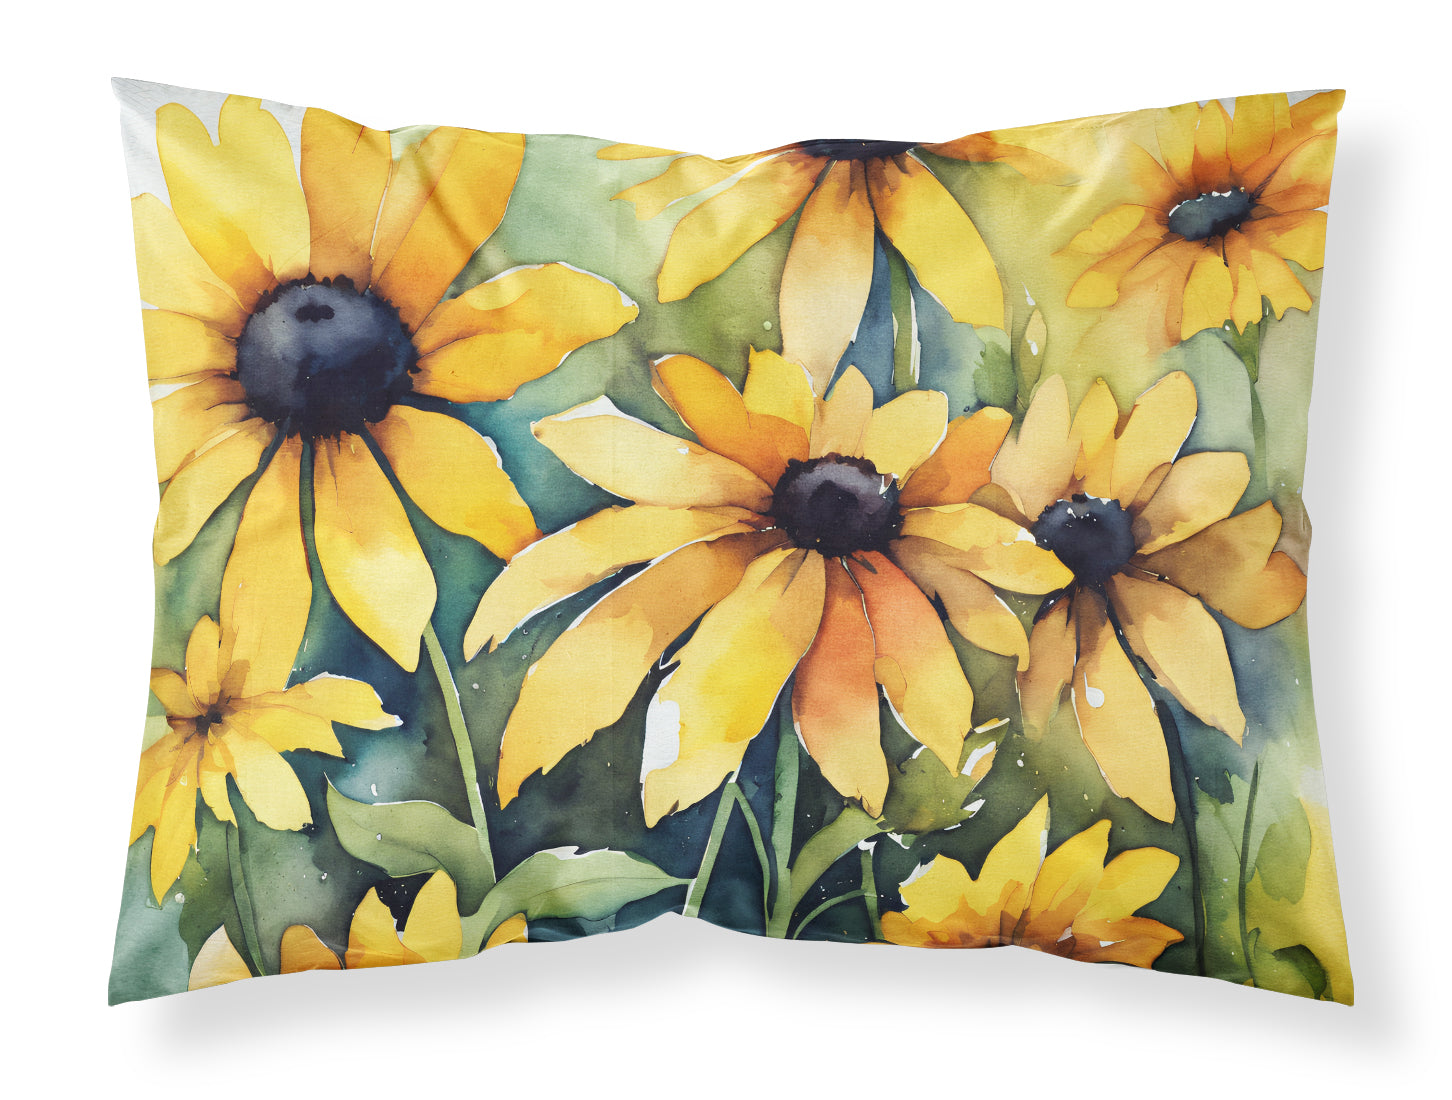 Buy this Maryland Black-Eyed Susans in Watercolor Fabric Standard Pillowcase